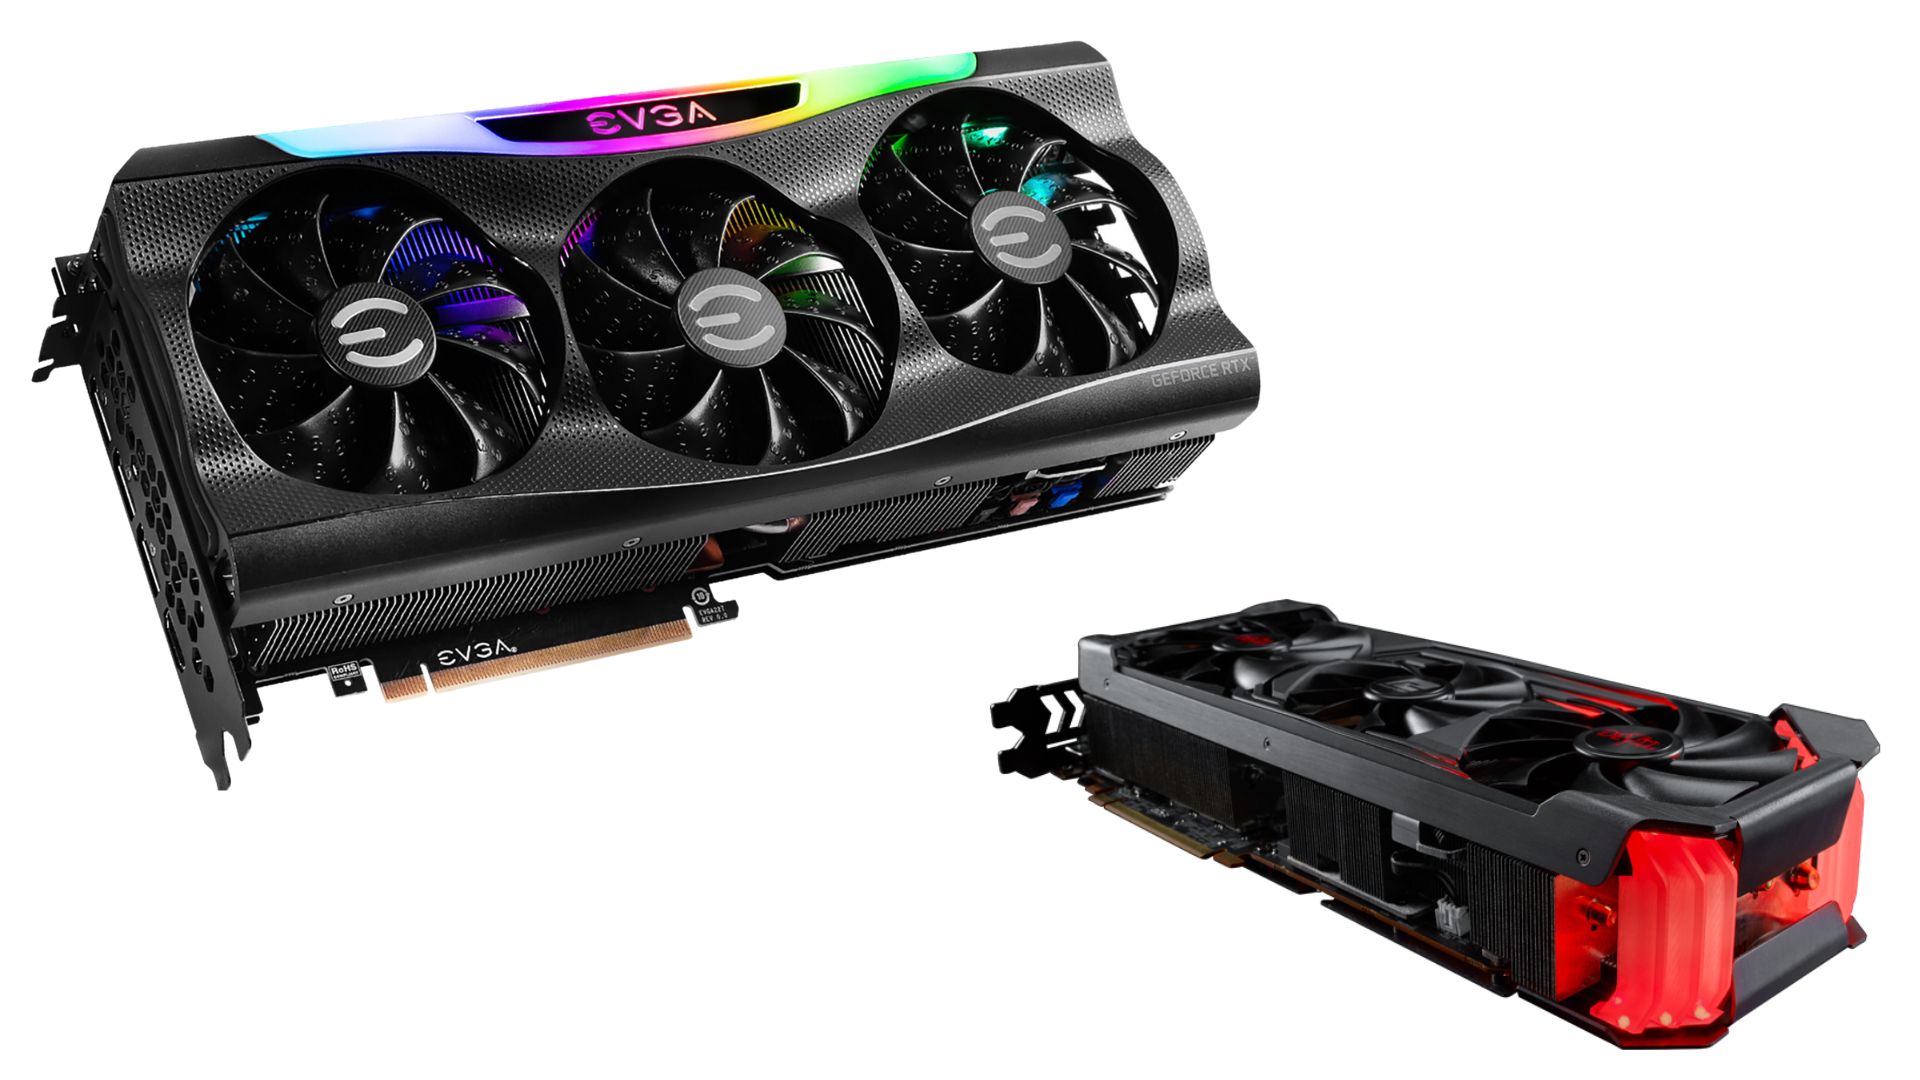 Best Graphics Cards for Streaming Games in 2022